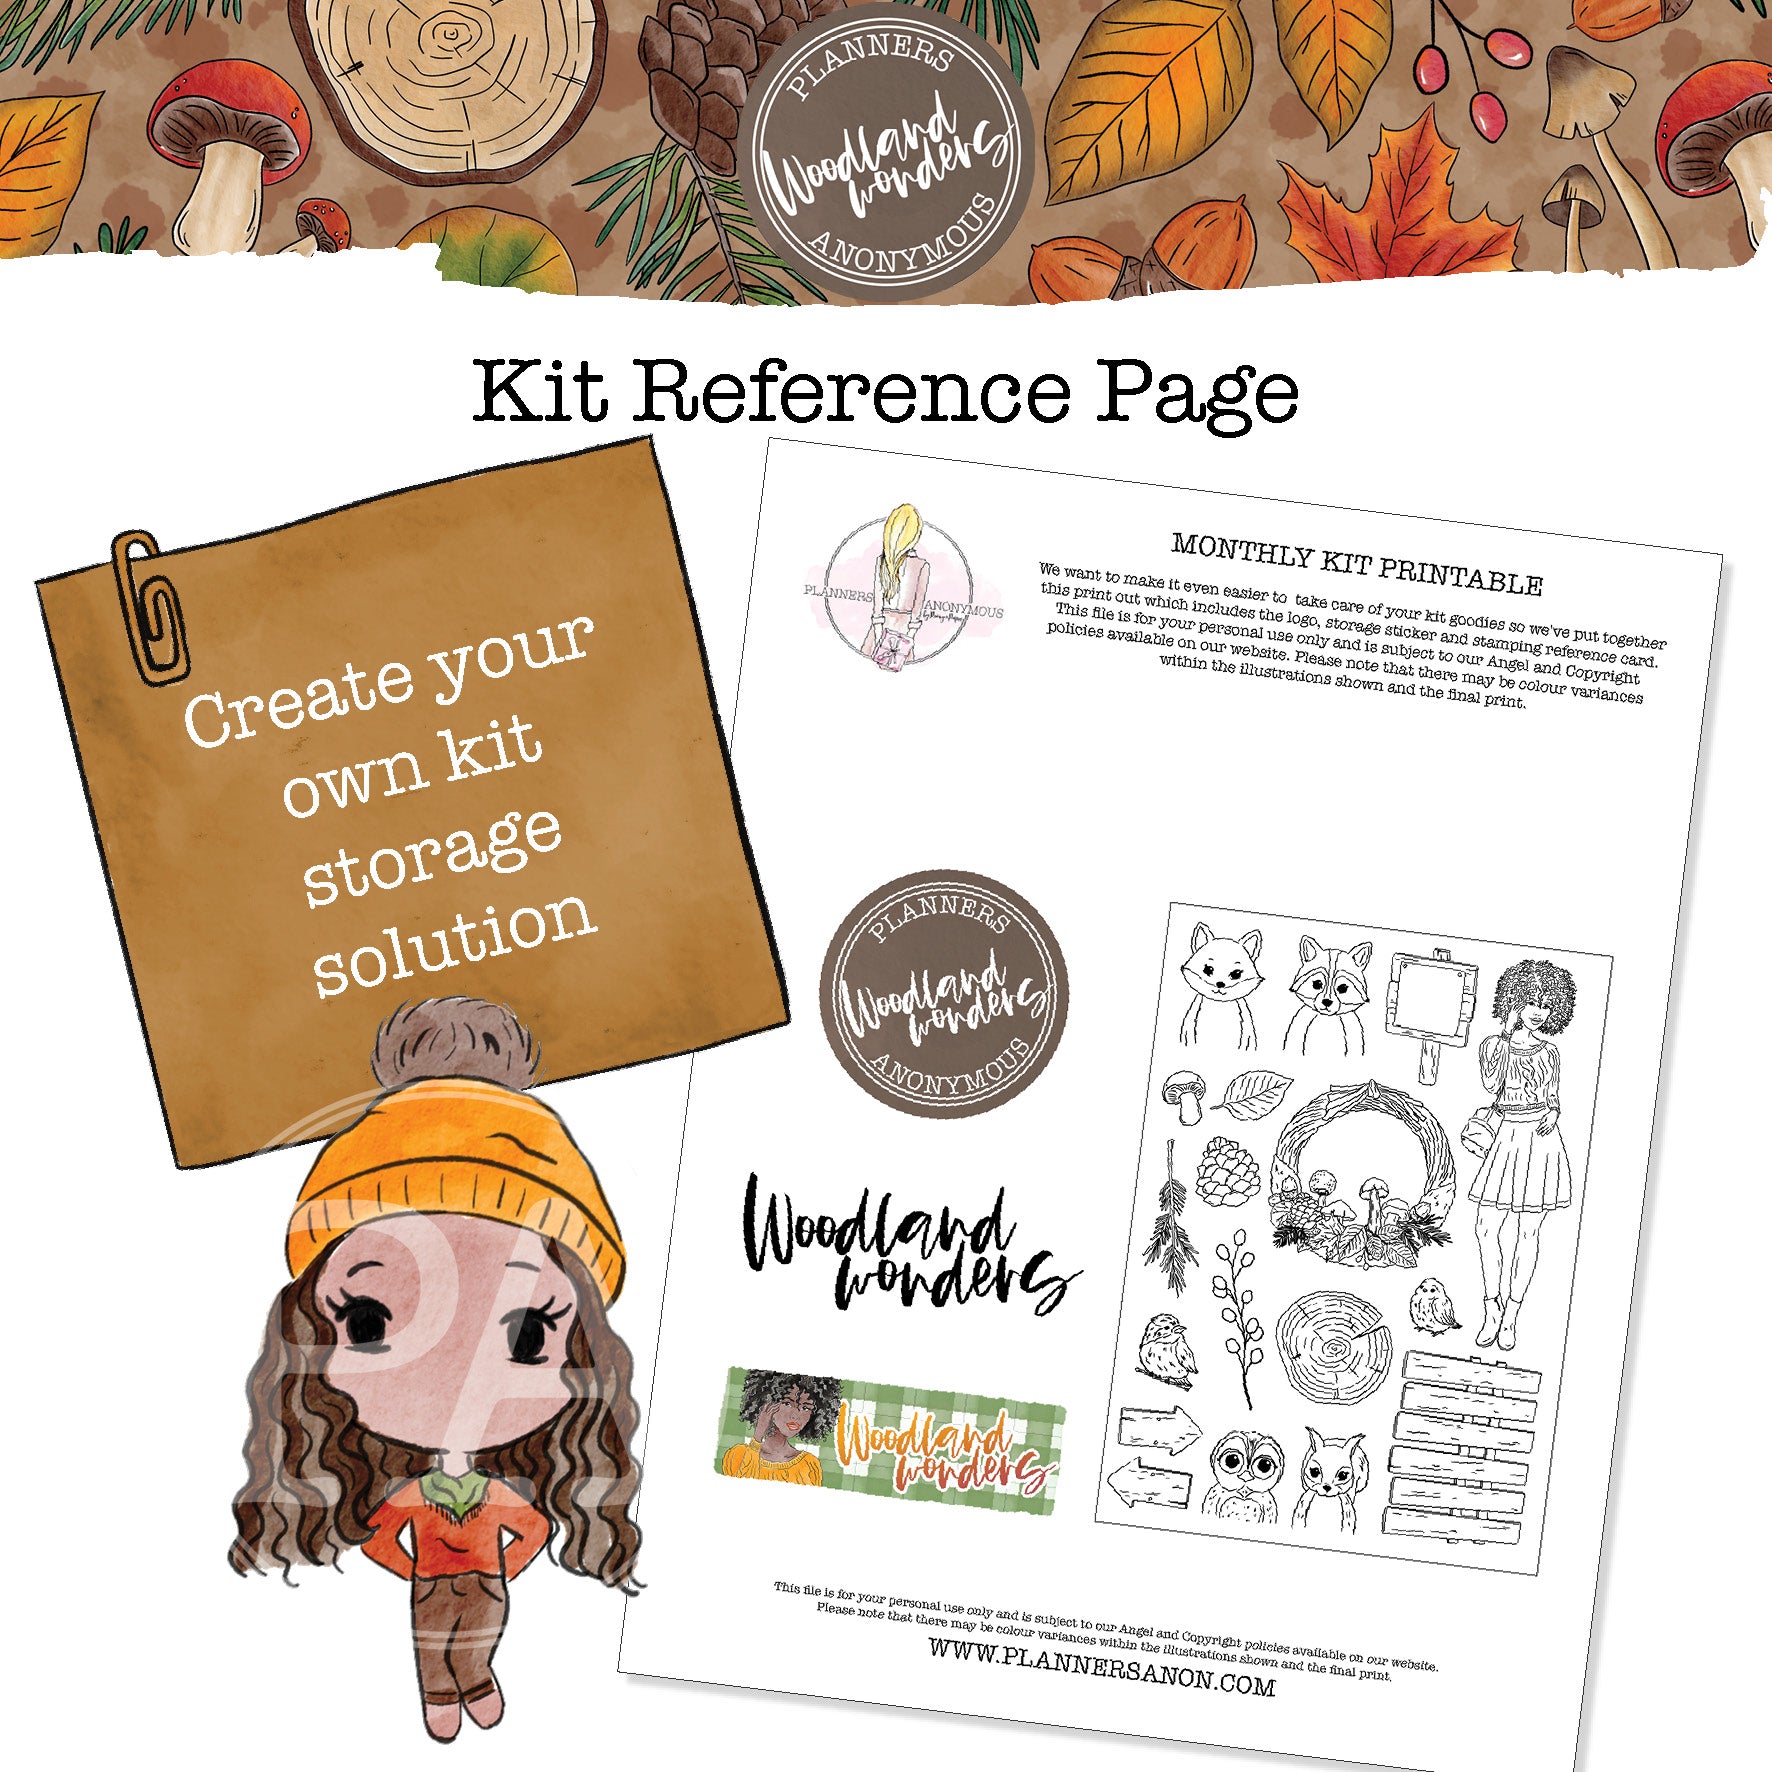 Woodland Wonders Kit Reference Page